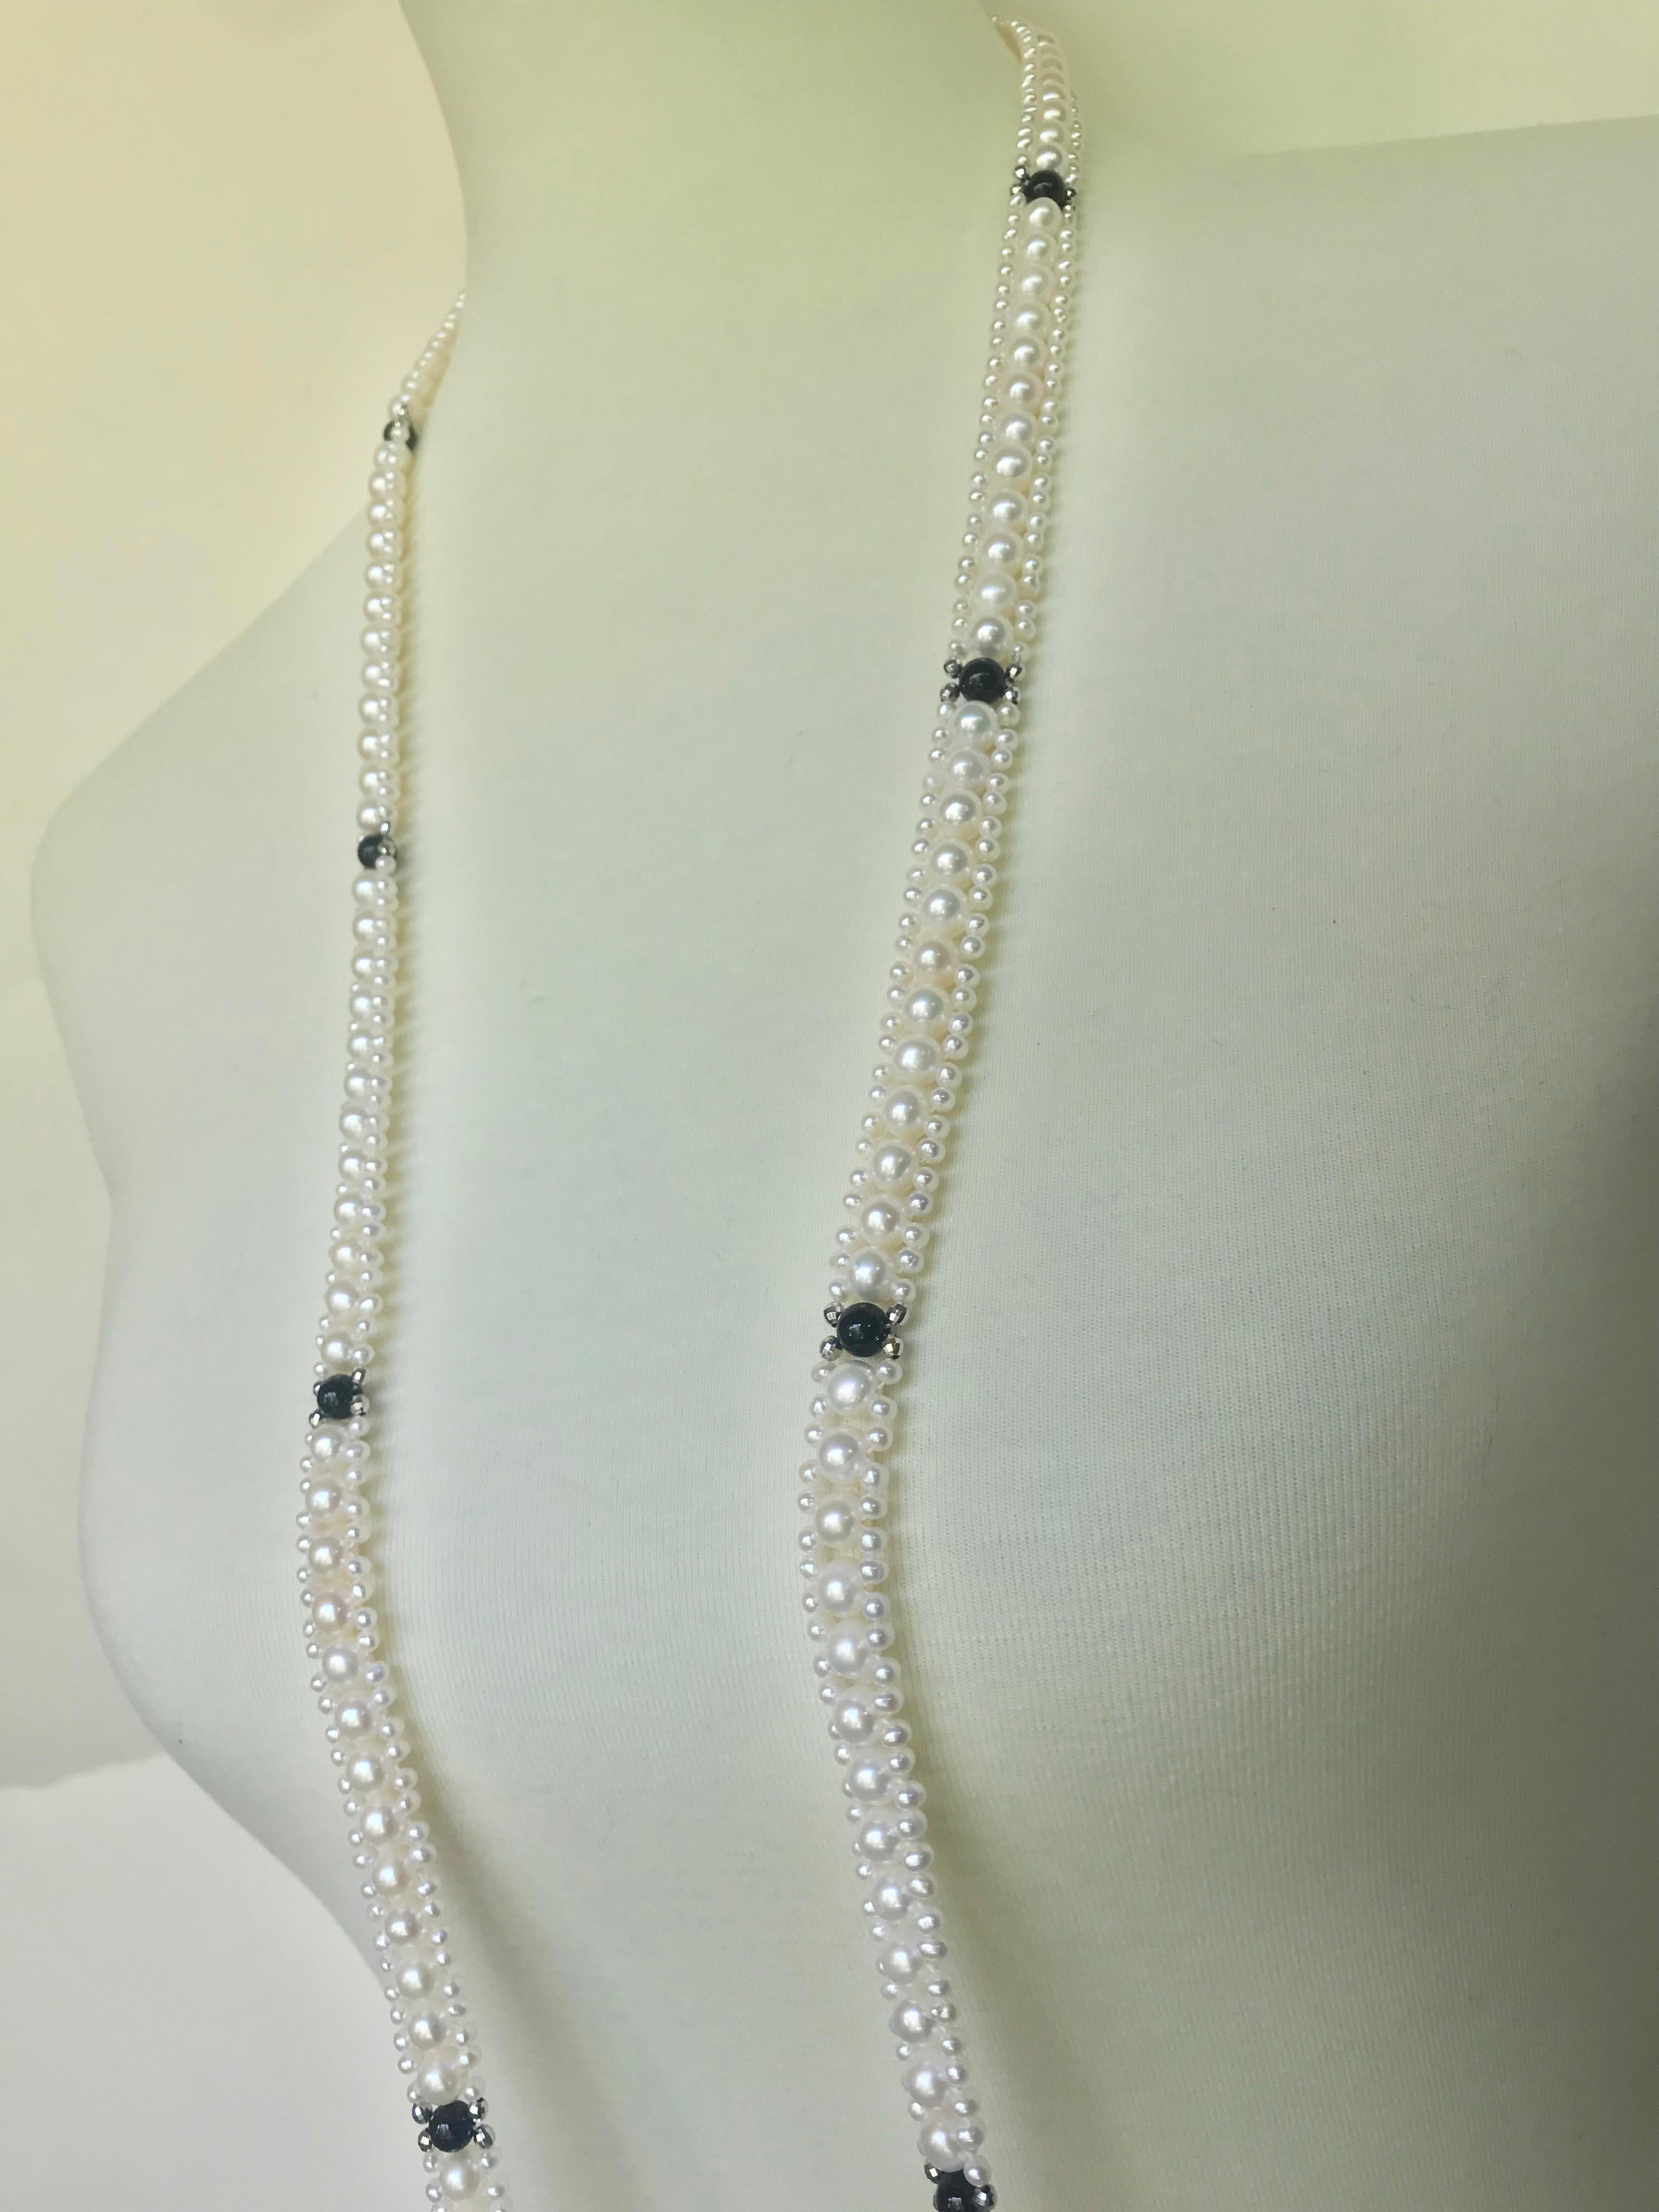 Marina J Woven Pearl Sautoir with Tassels and 14 K White Gold and Onyx beads 5